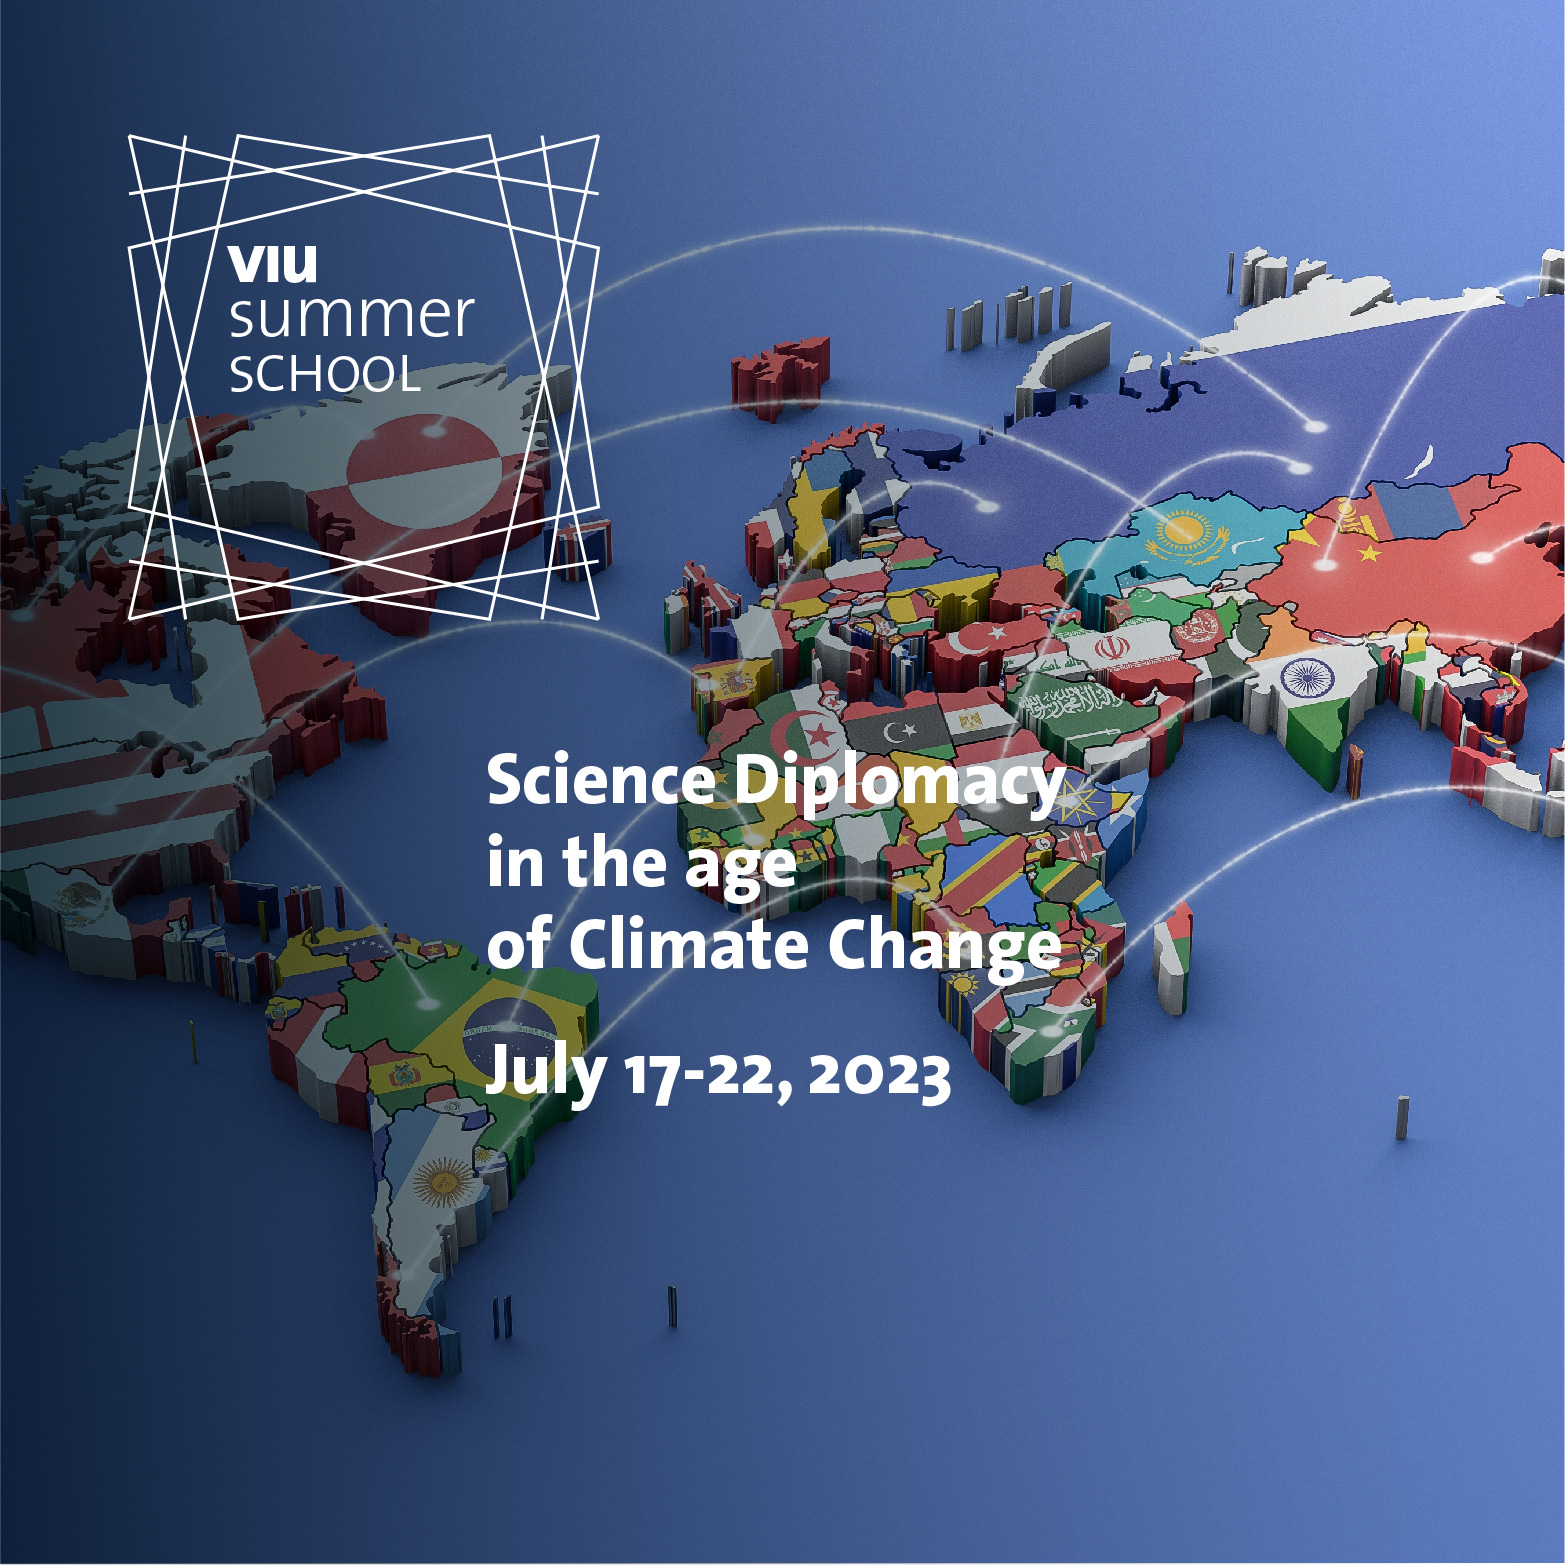 Summer School | Science Diplomacy: Improving Capacity of Science to Inform Policy | July 17-22, 2023